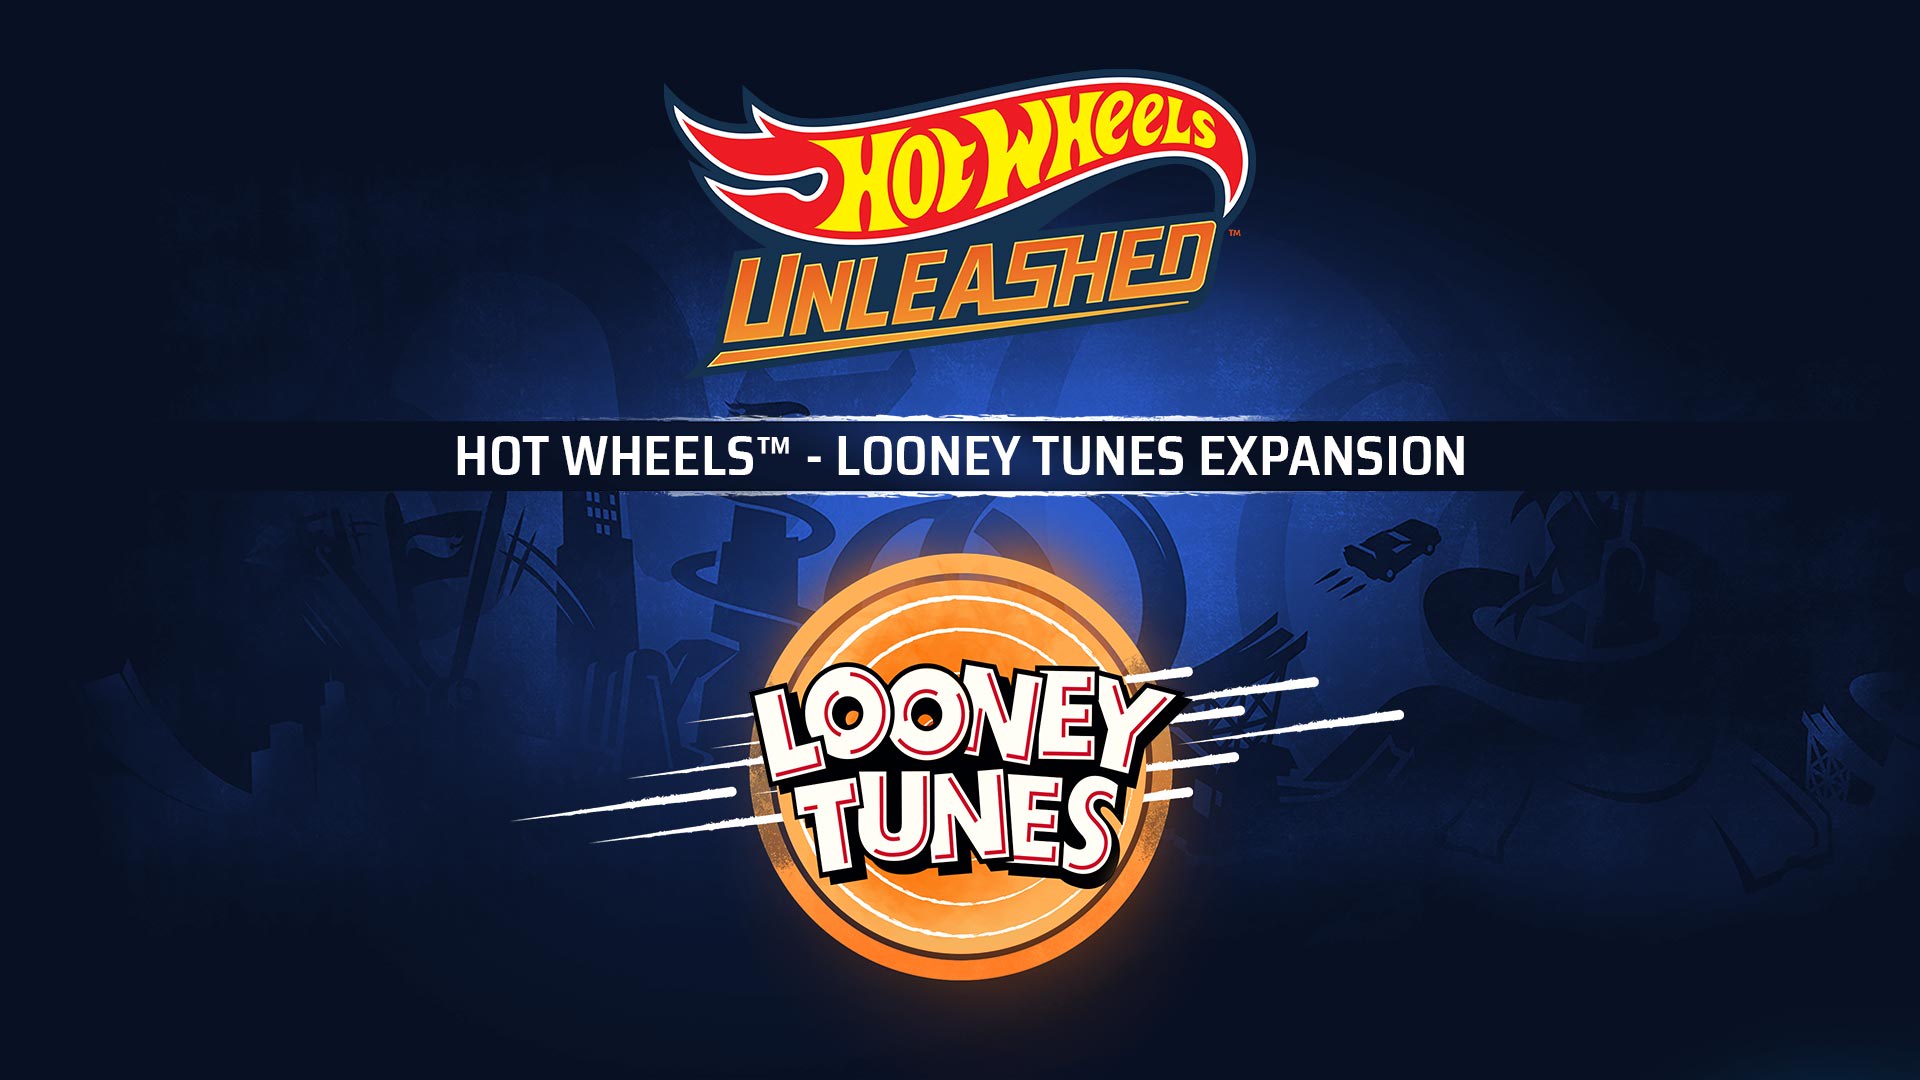 HOT WHEELS™ - Looney Tunes Expansion